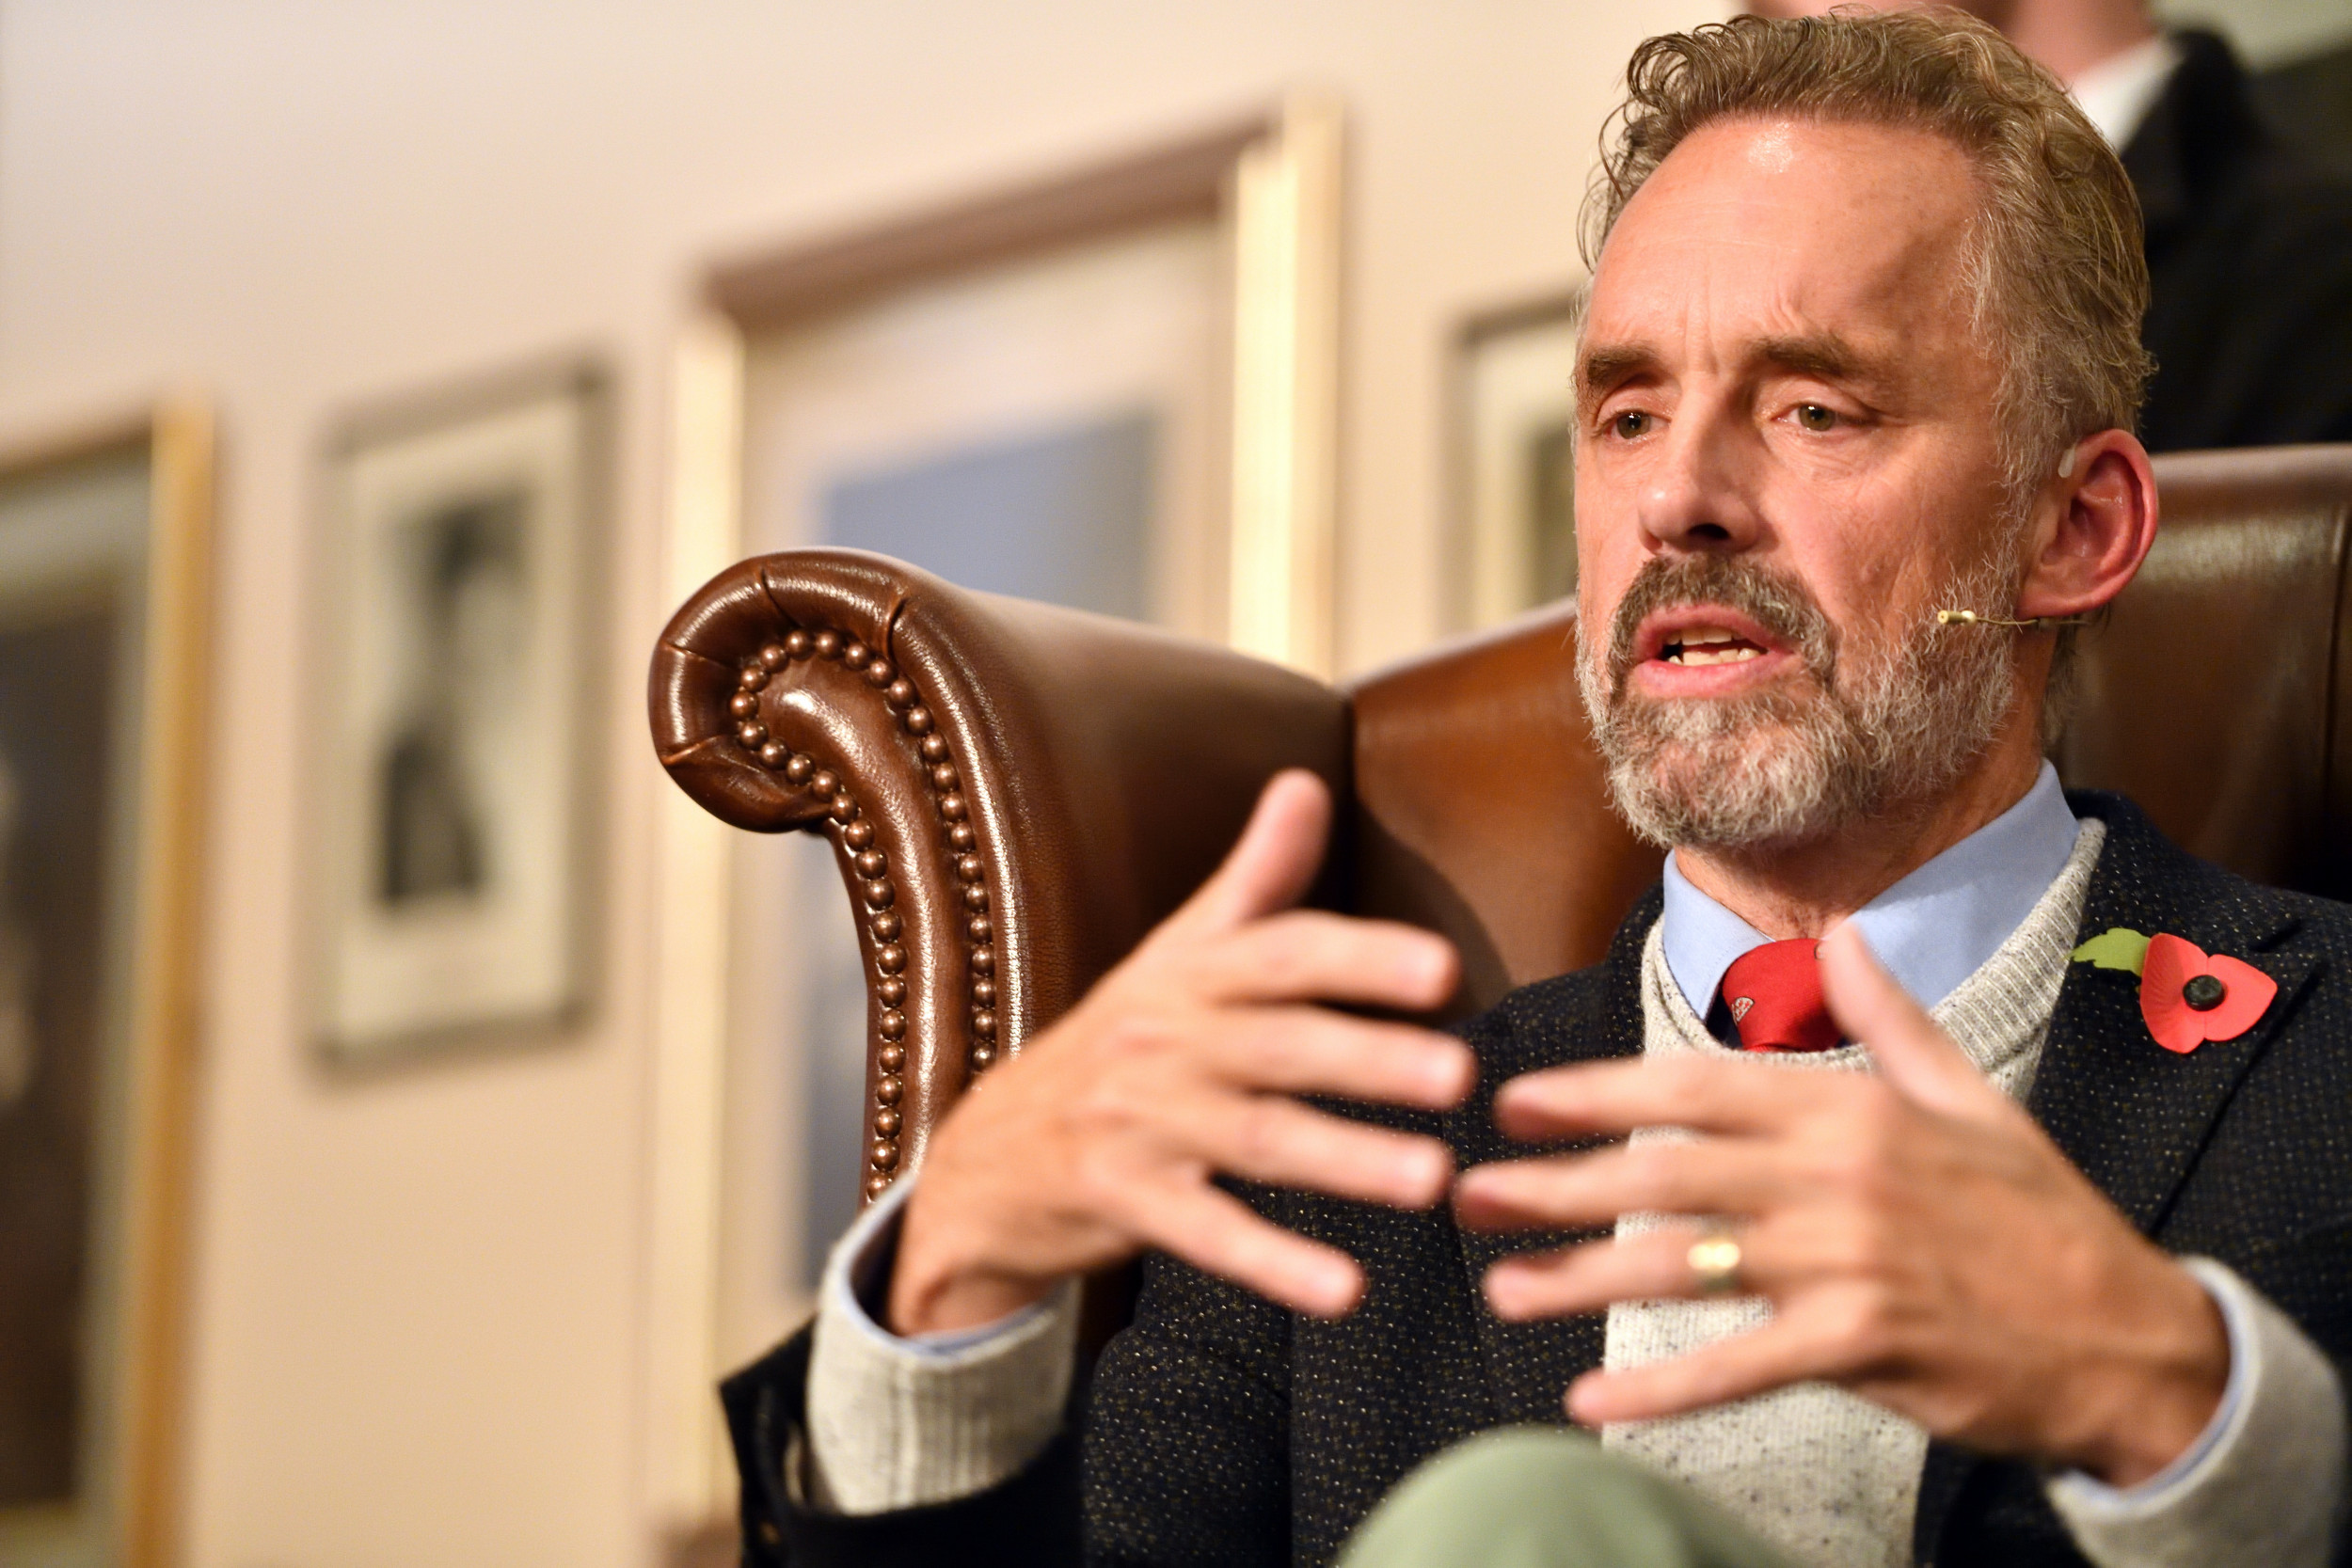 Jordan Peterson's New Book Release Prompts Tears, Outcry Among Publisher's